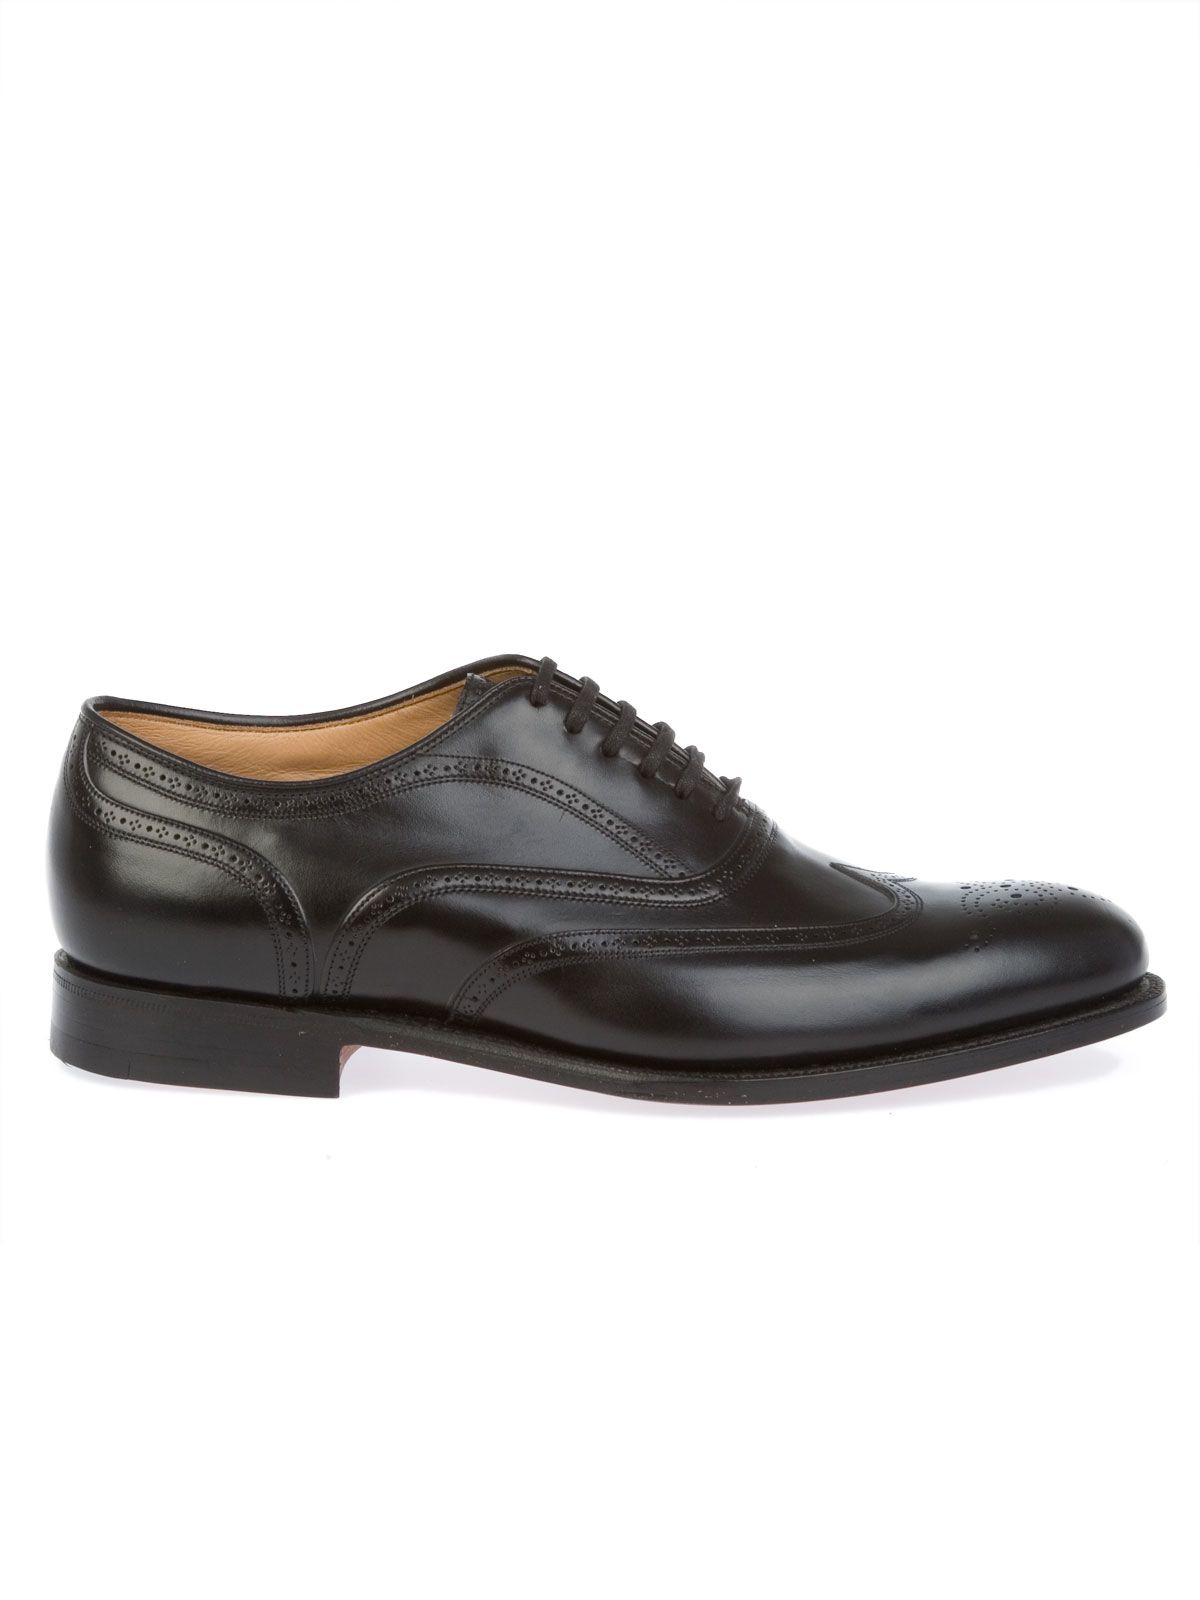 CHURCH'S MEN'S GUNTHORPECALFBLACK BLACK LEATHER LACE-UP SHOES